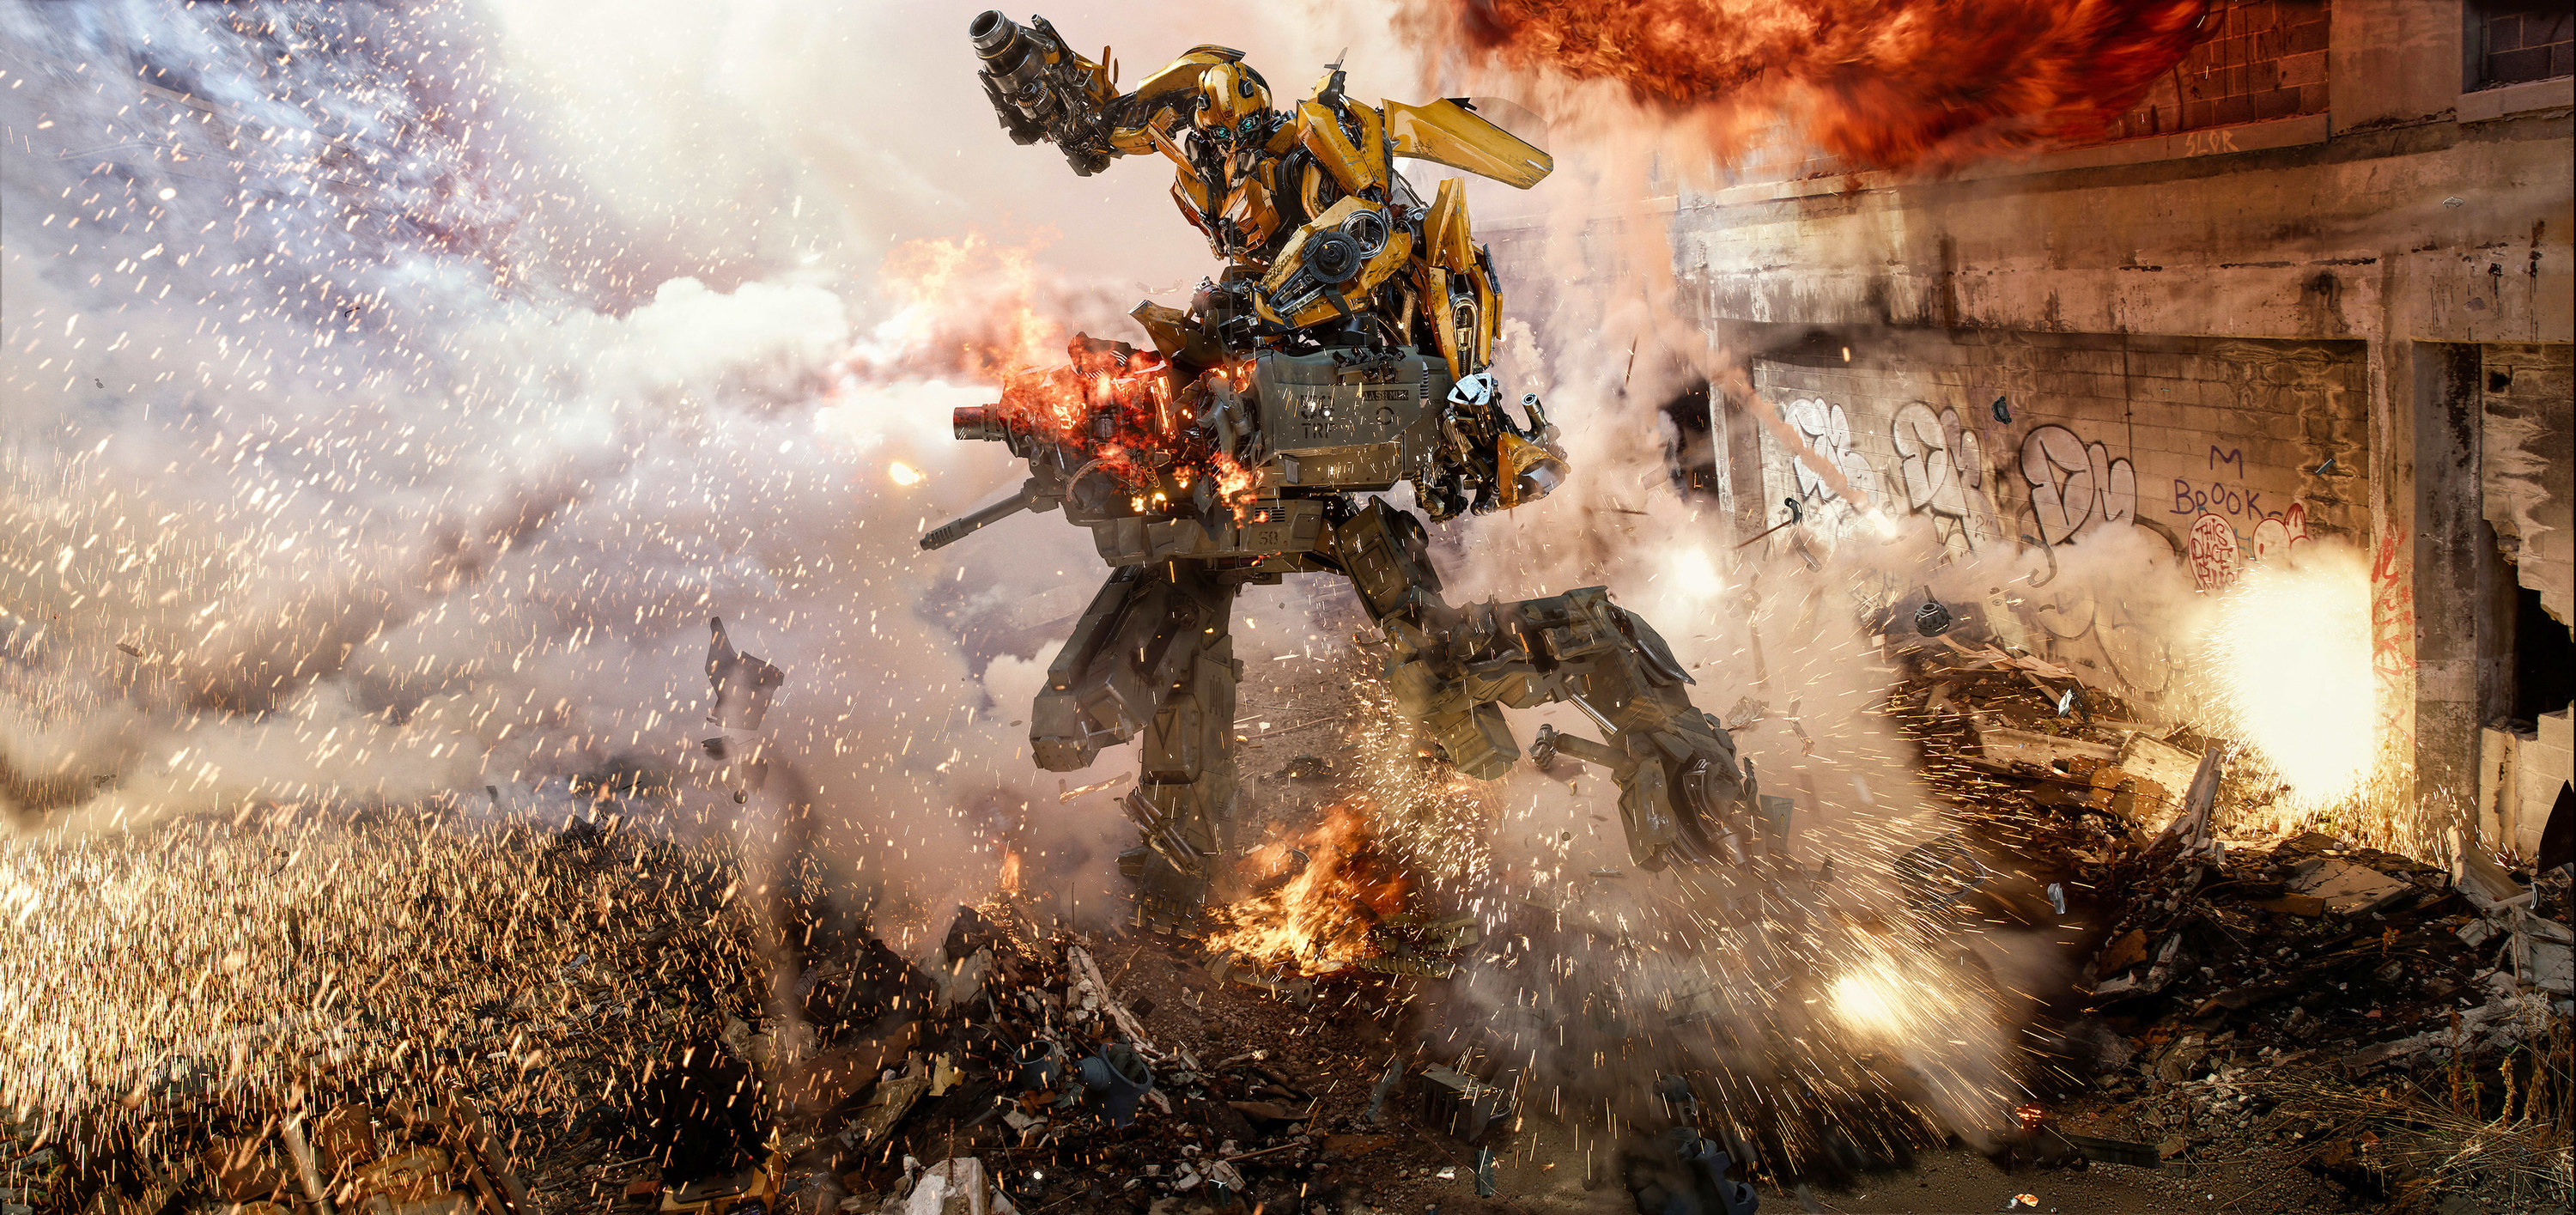 Action scene from Transformers